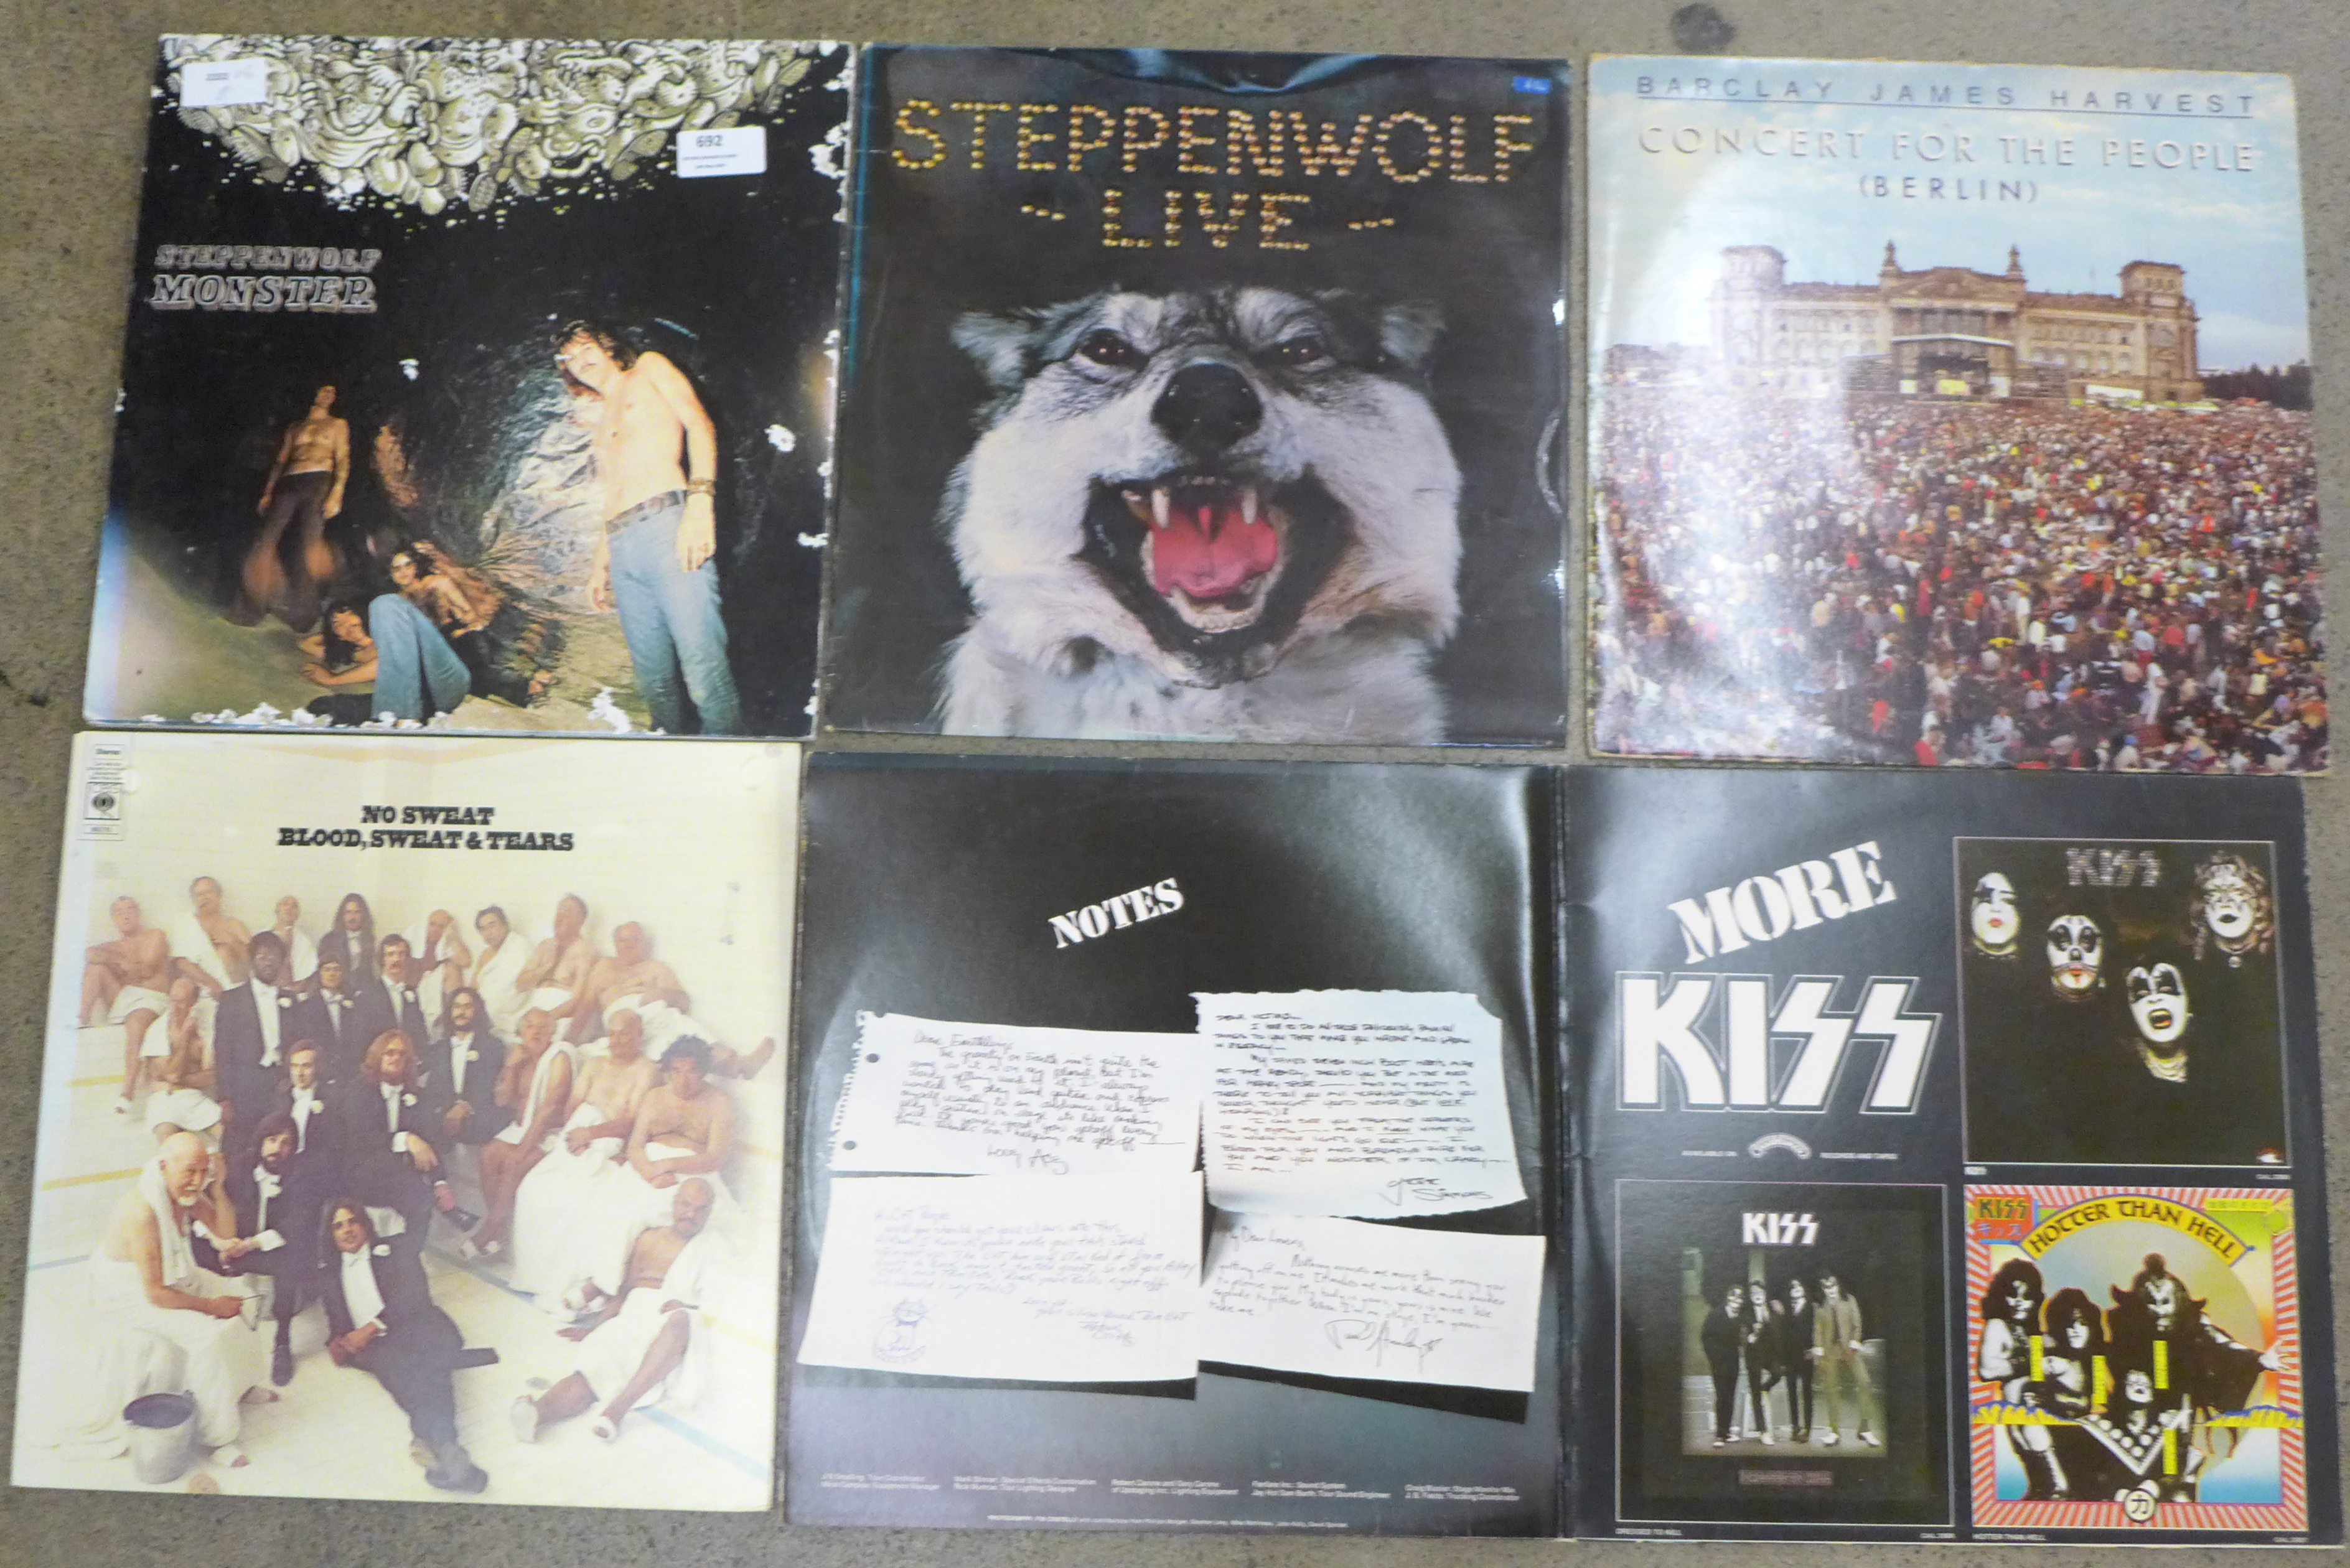 Five LP records, Steppenwolf x2, Kiss, Barclay James Harvest and Blood, Sweat and Tears